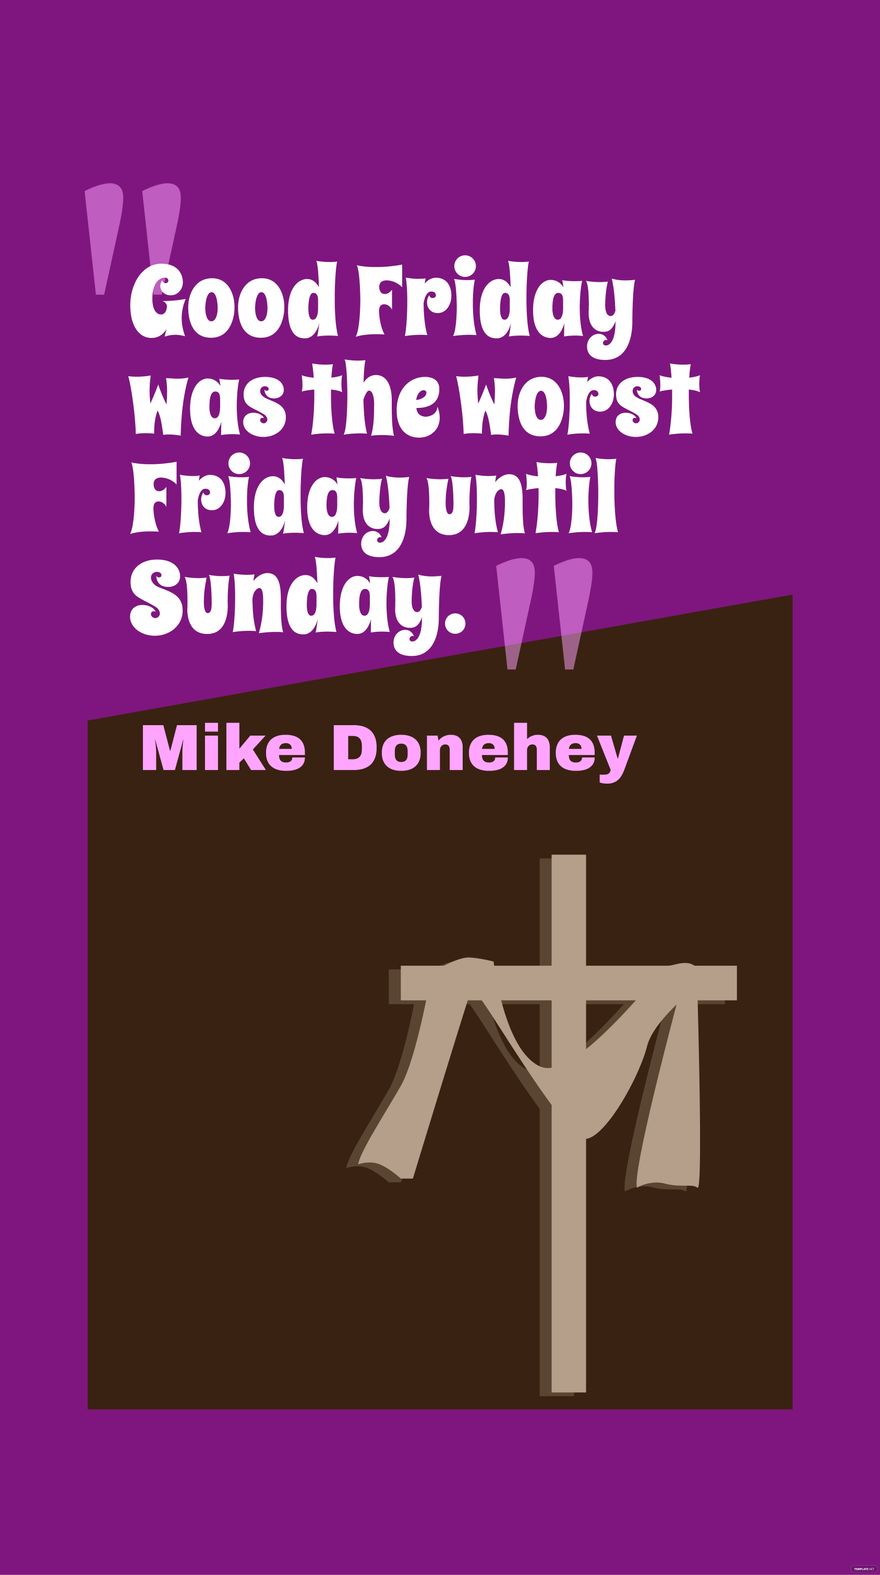 Free Mike Donehey - Good Friday was the worst Friday until Sunday.